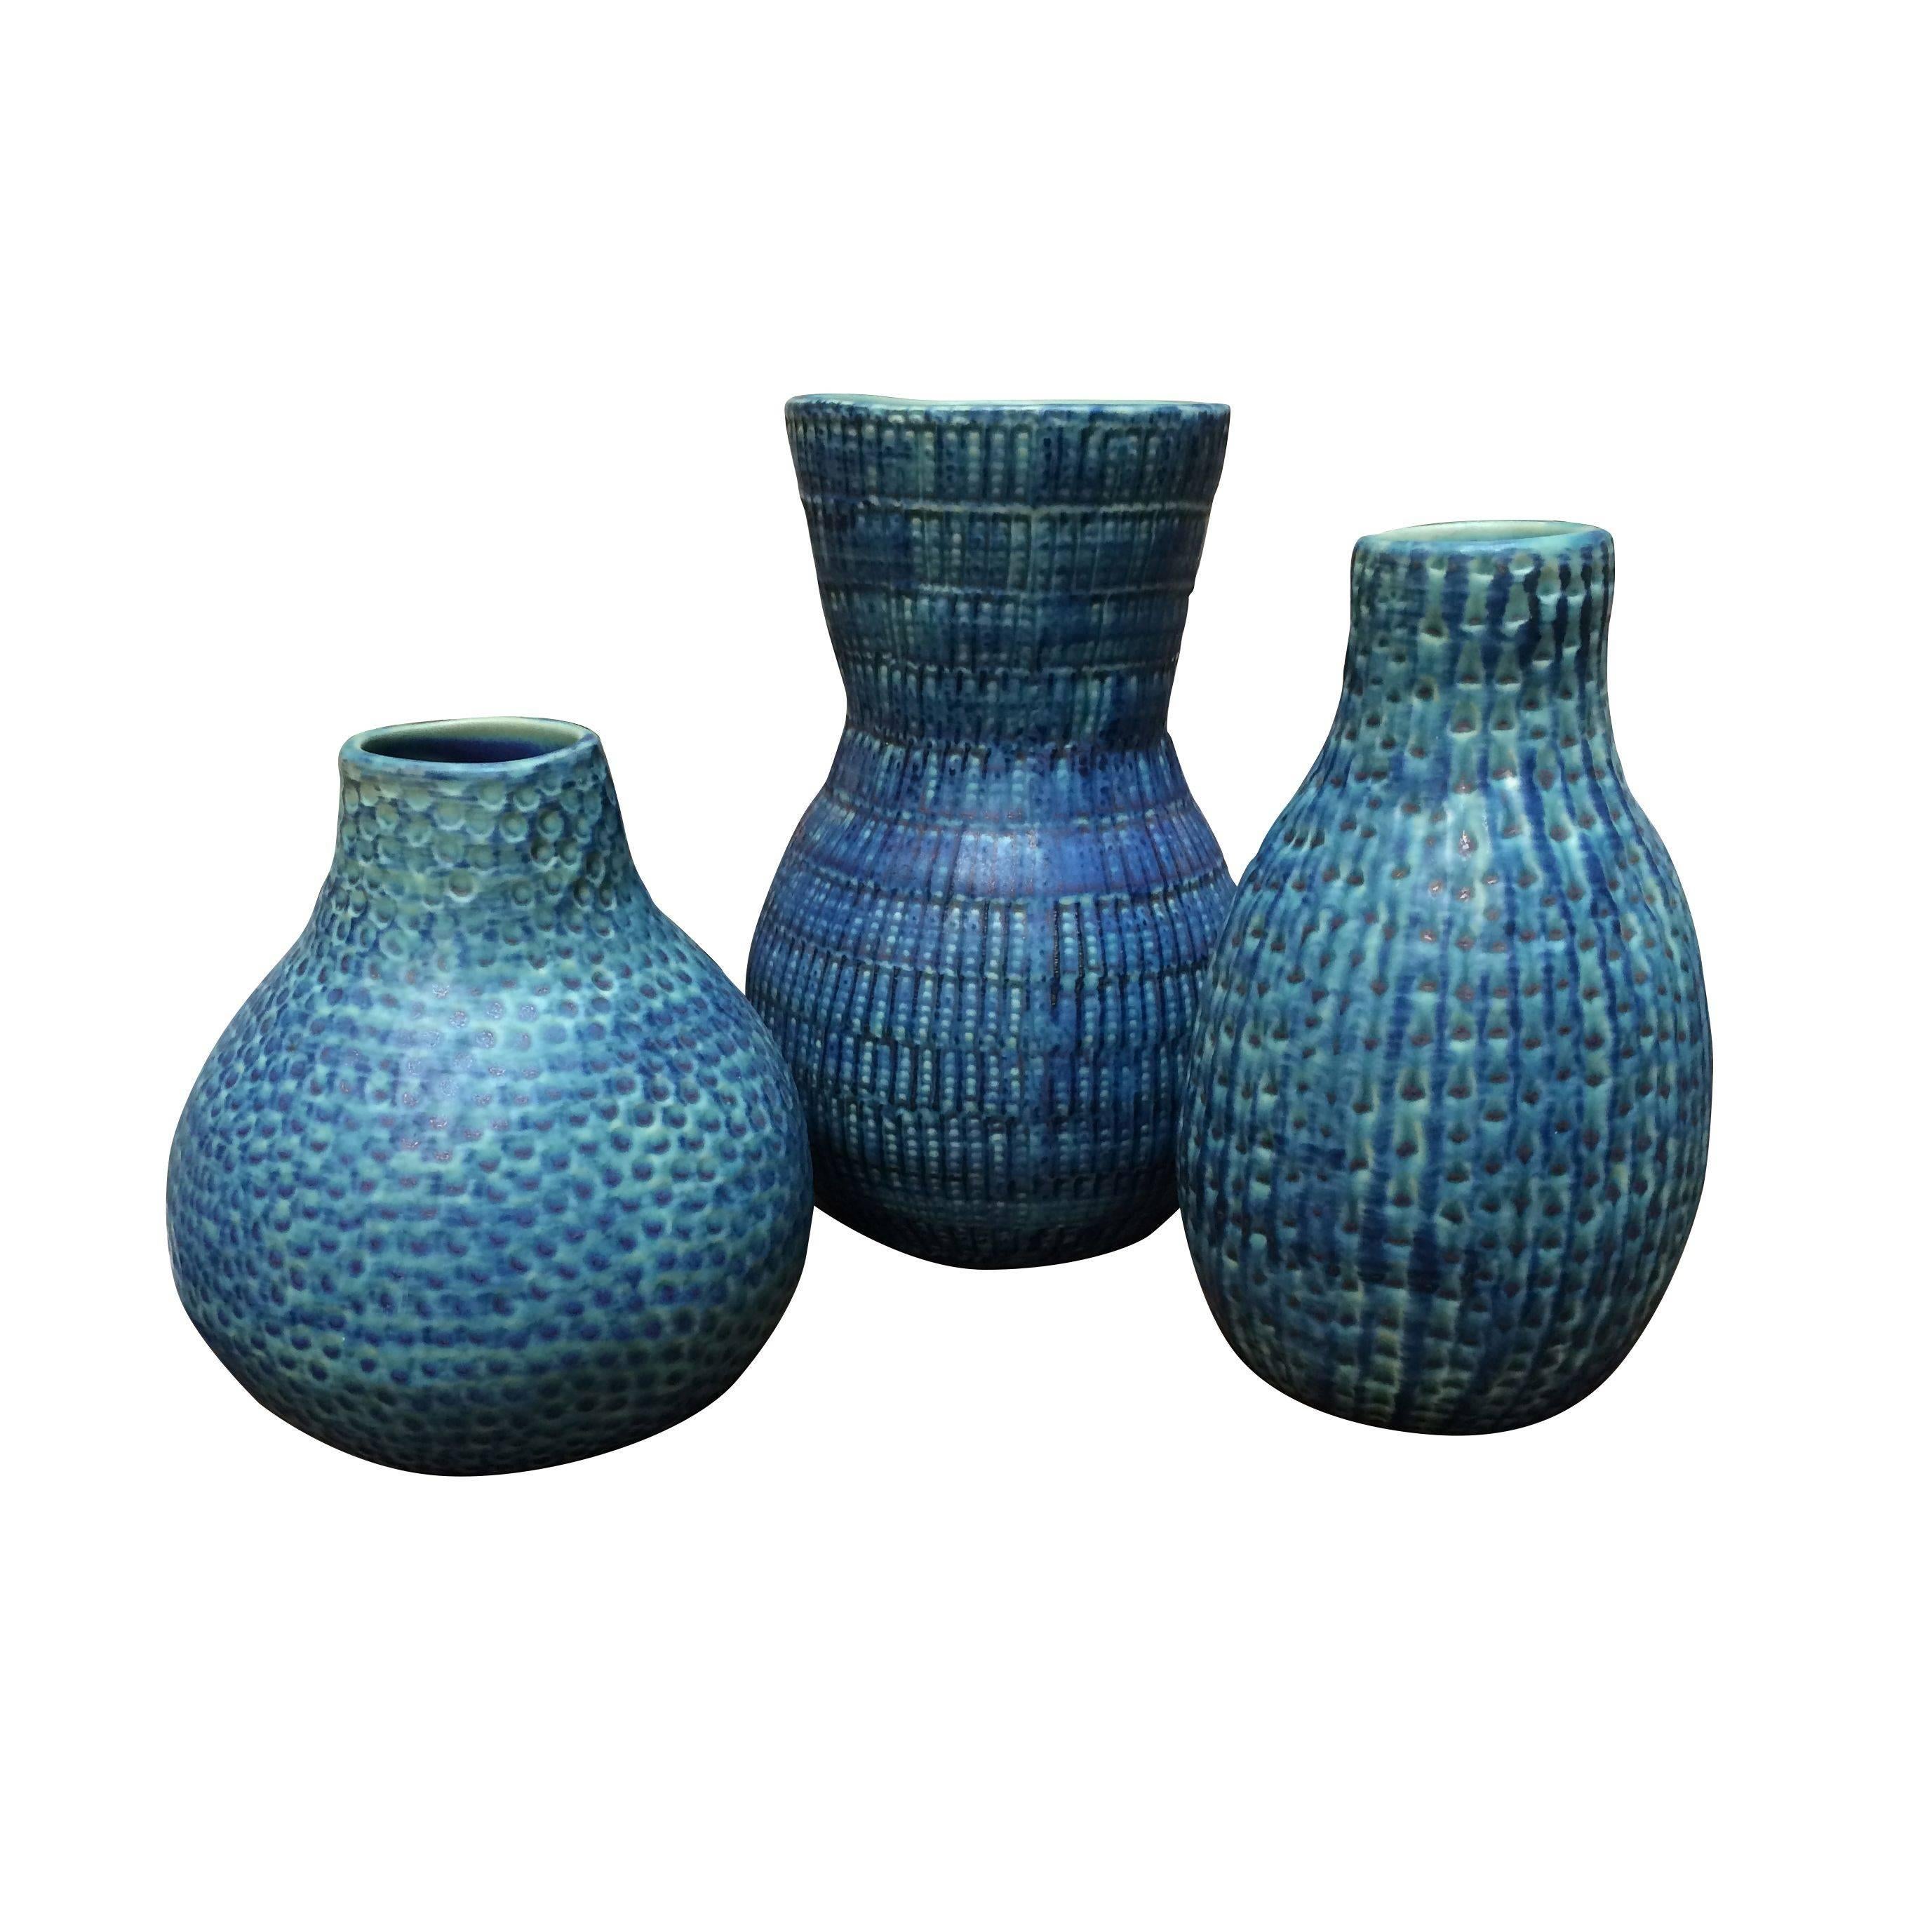 Contemporary textured small bowl shaped washed shades of turquoise vase.
Works well with S4635 and S4636.
Arriving August.
 